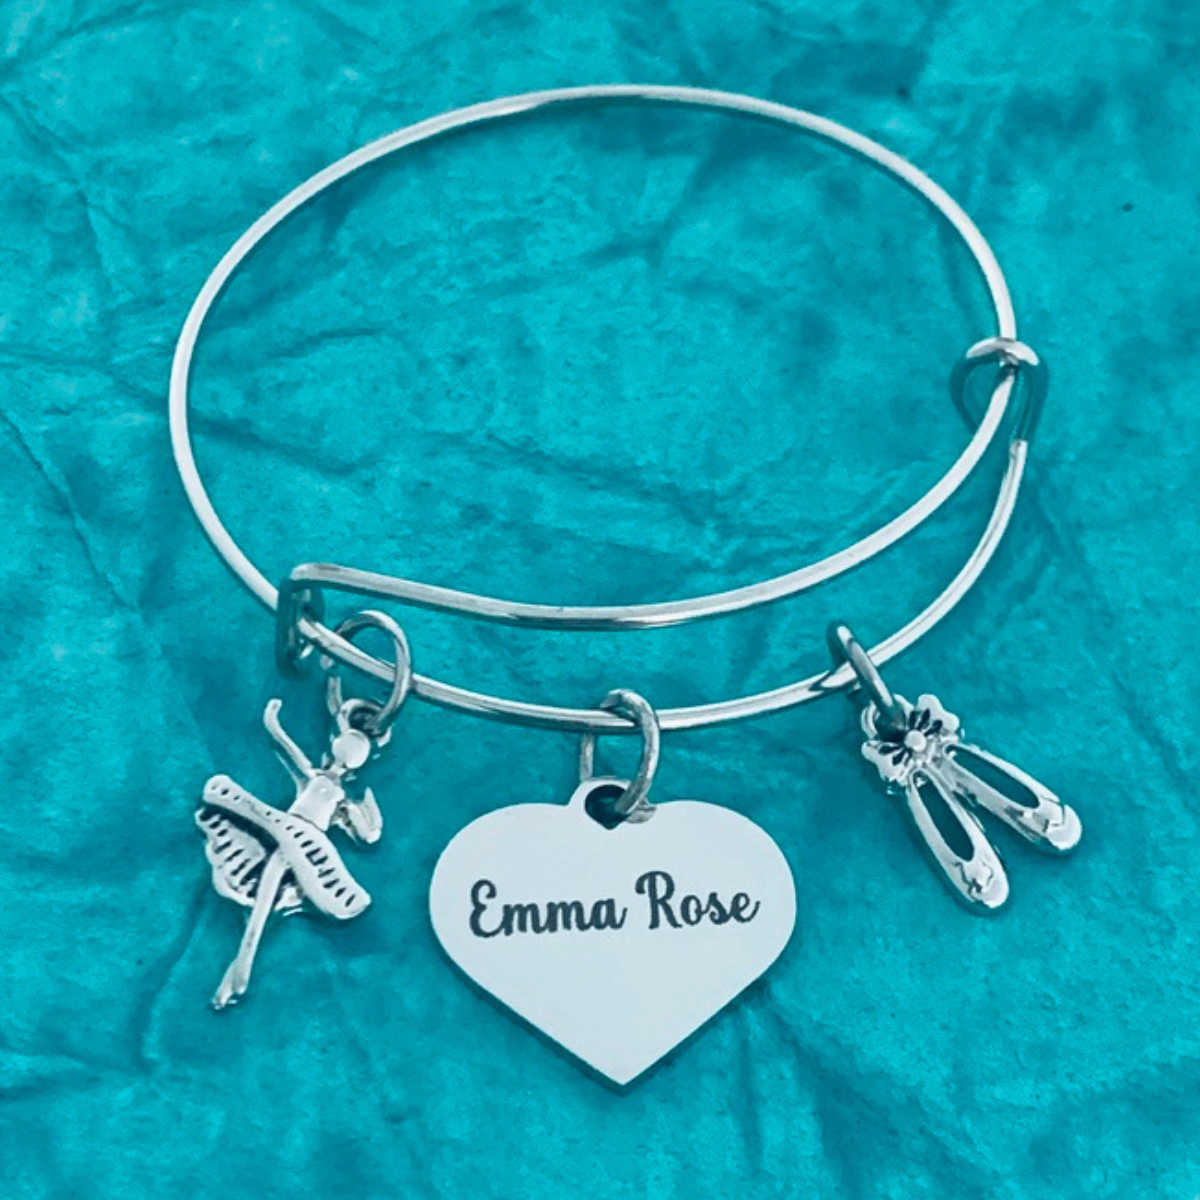 Personalized Dance Charm Bangle Bracelet with Engraved Charm